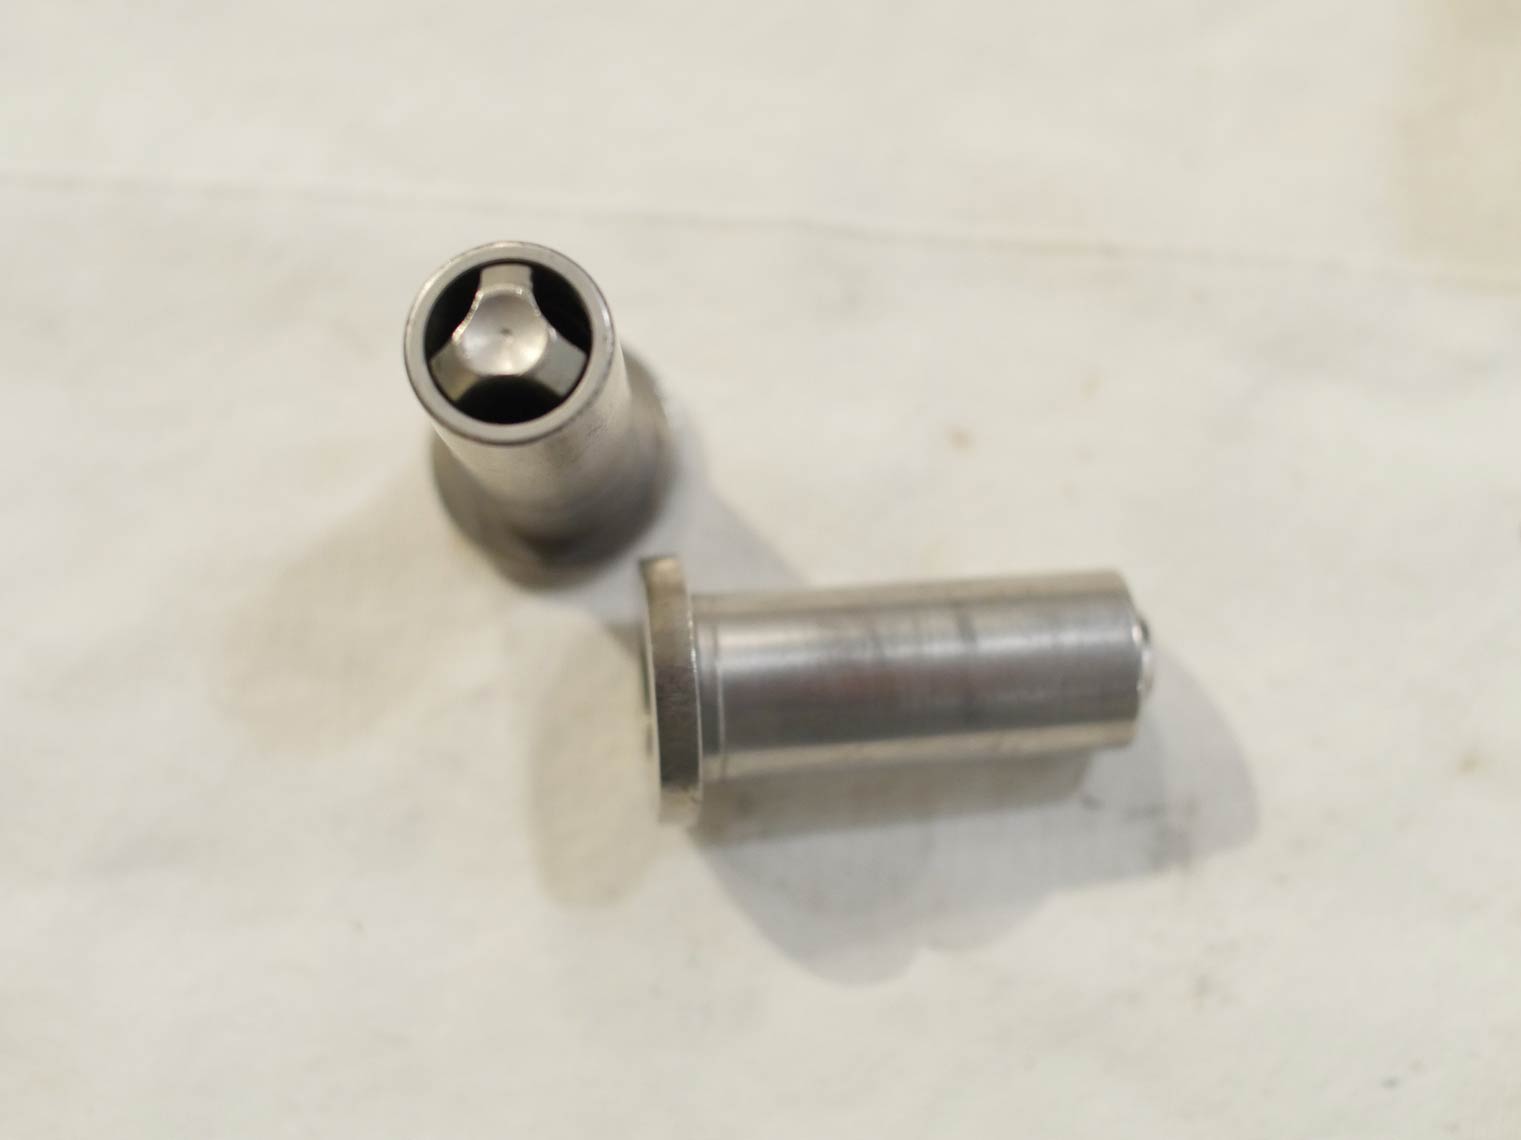 Stock AGD bolt in used shape, wear from sear